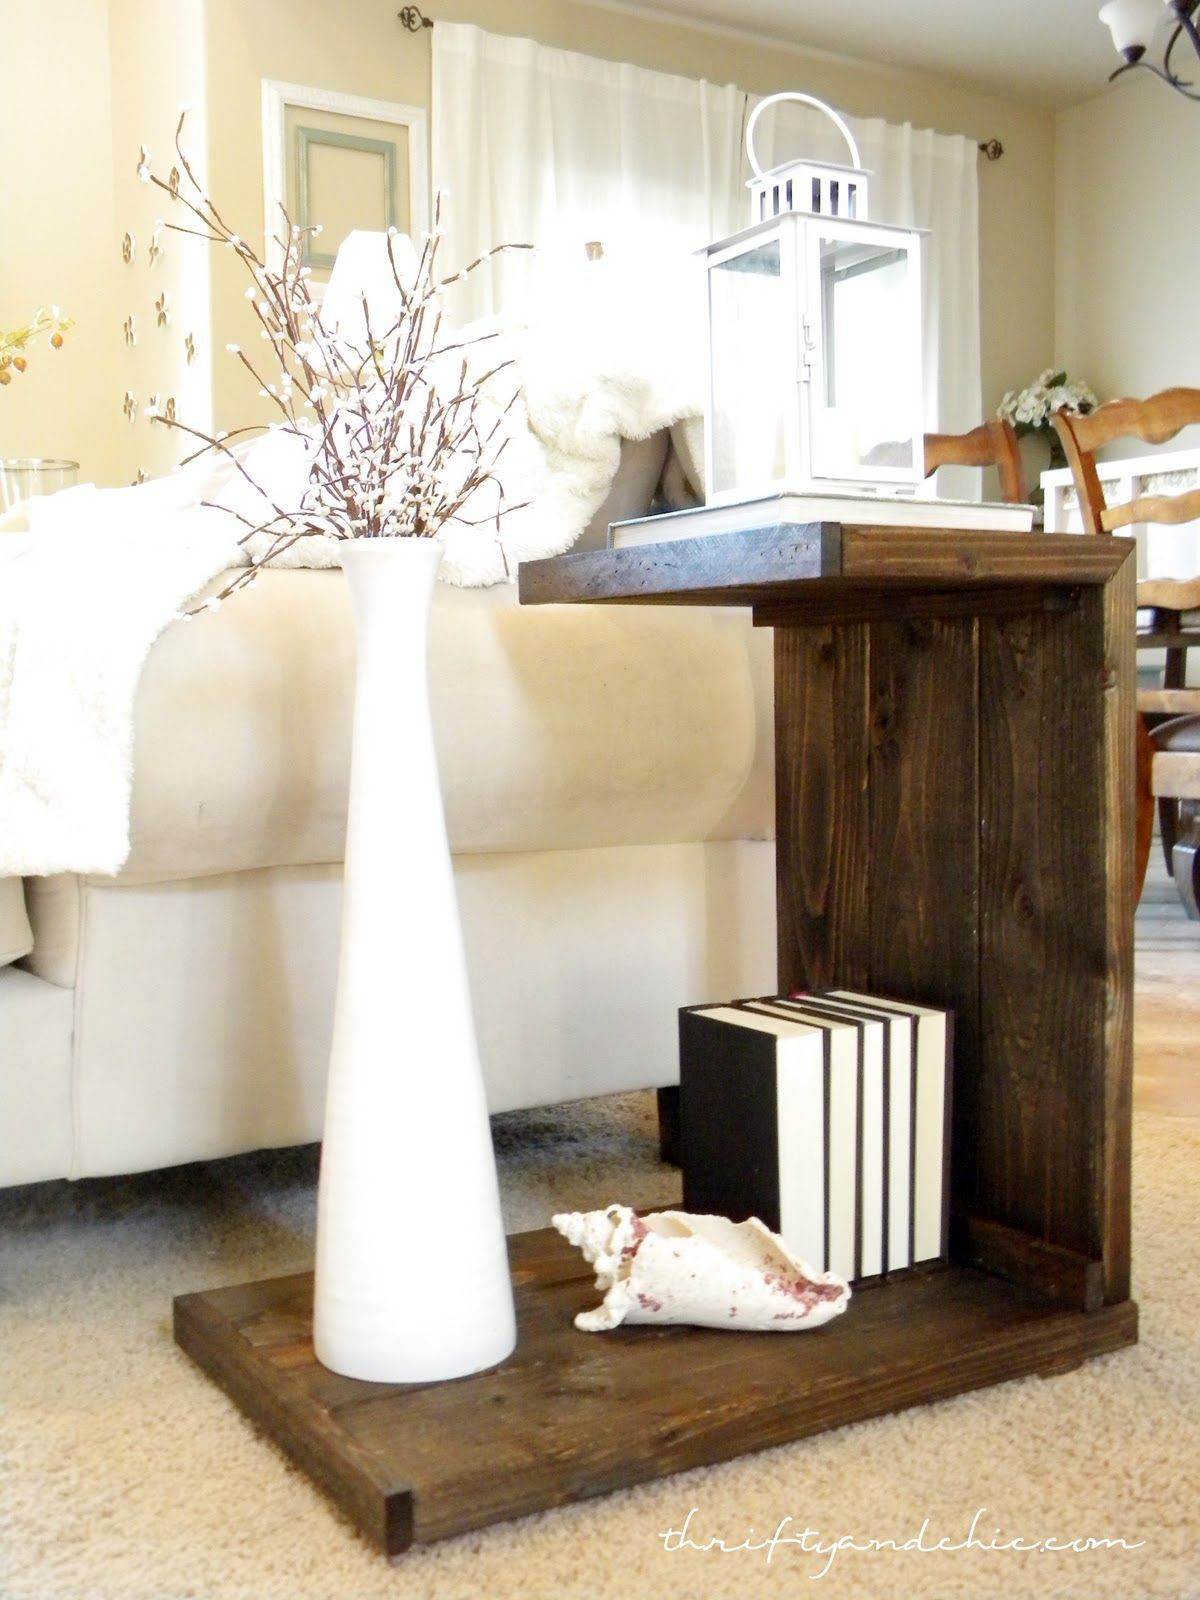 Thrifty and Chic: Building A Unique Side Table